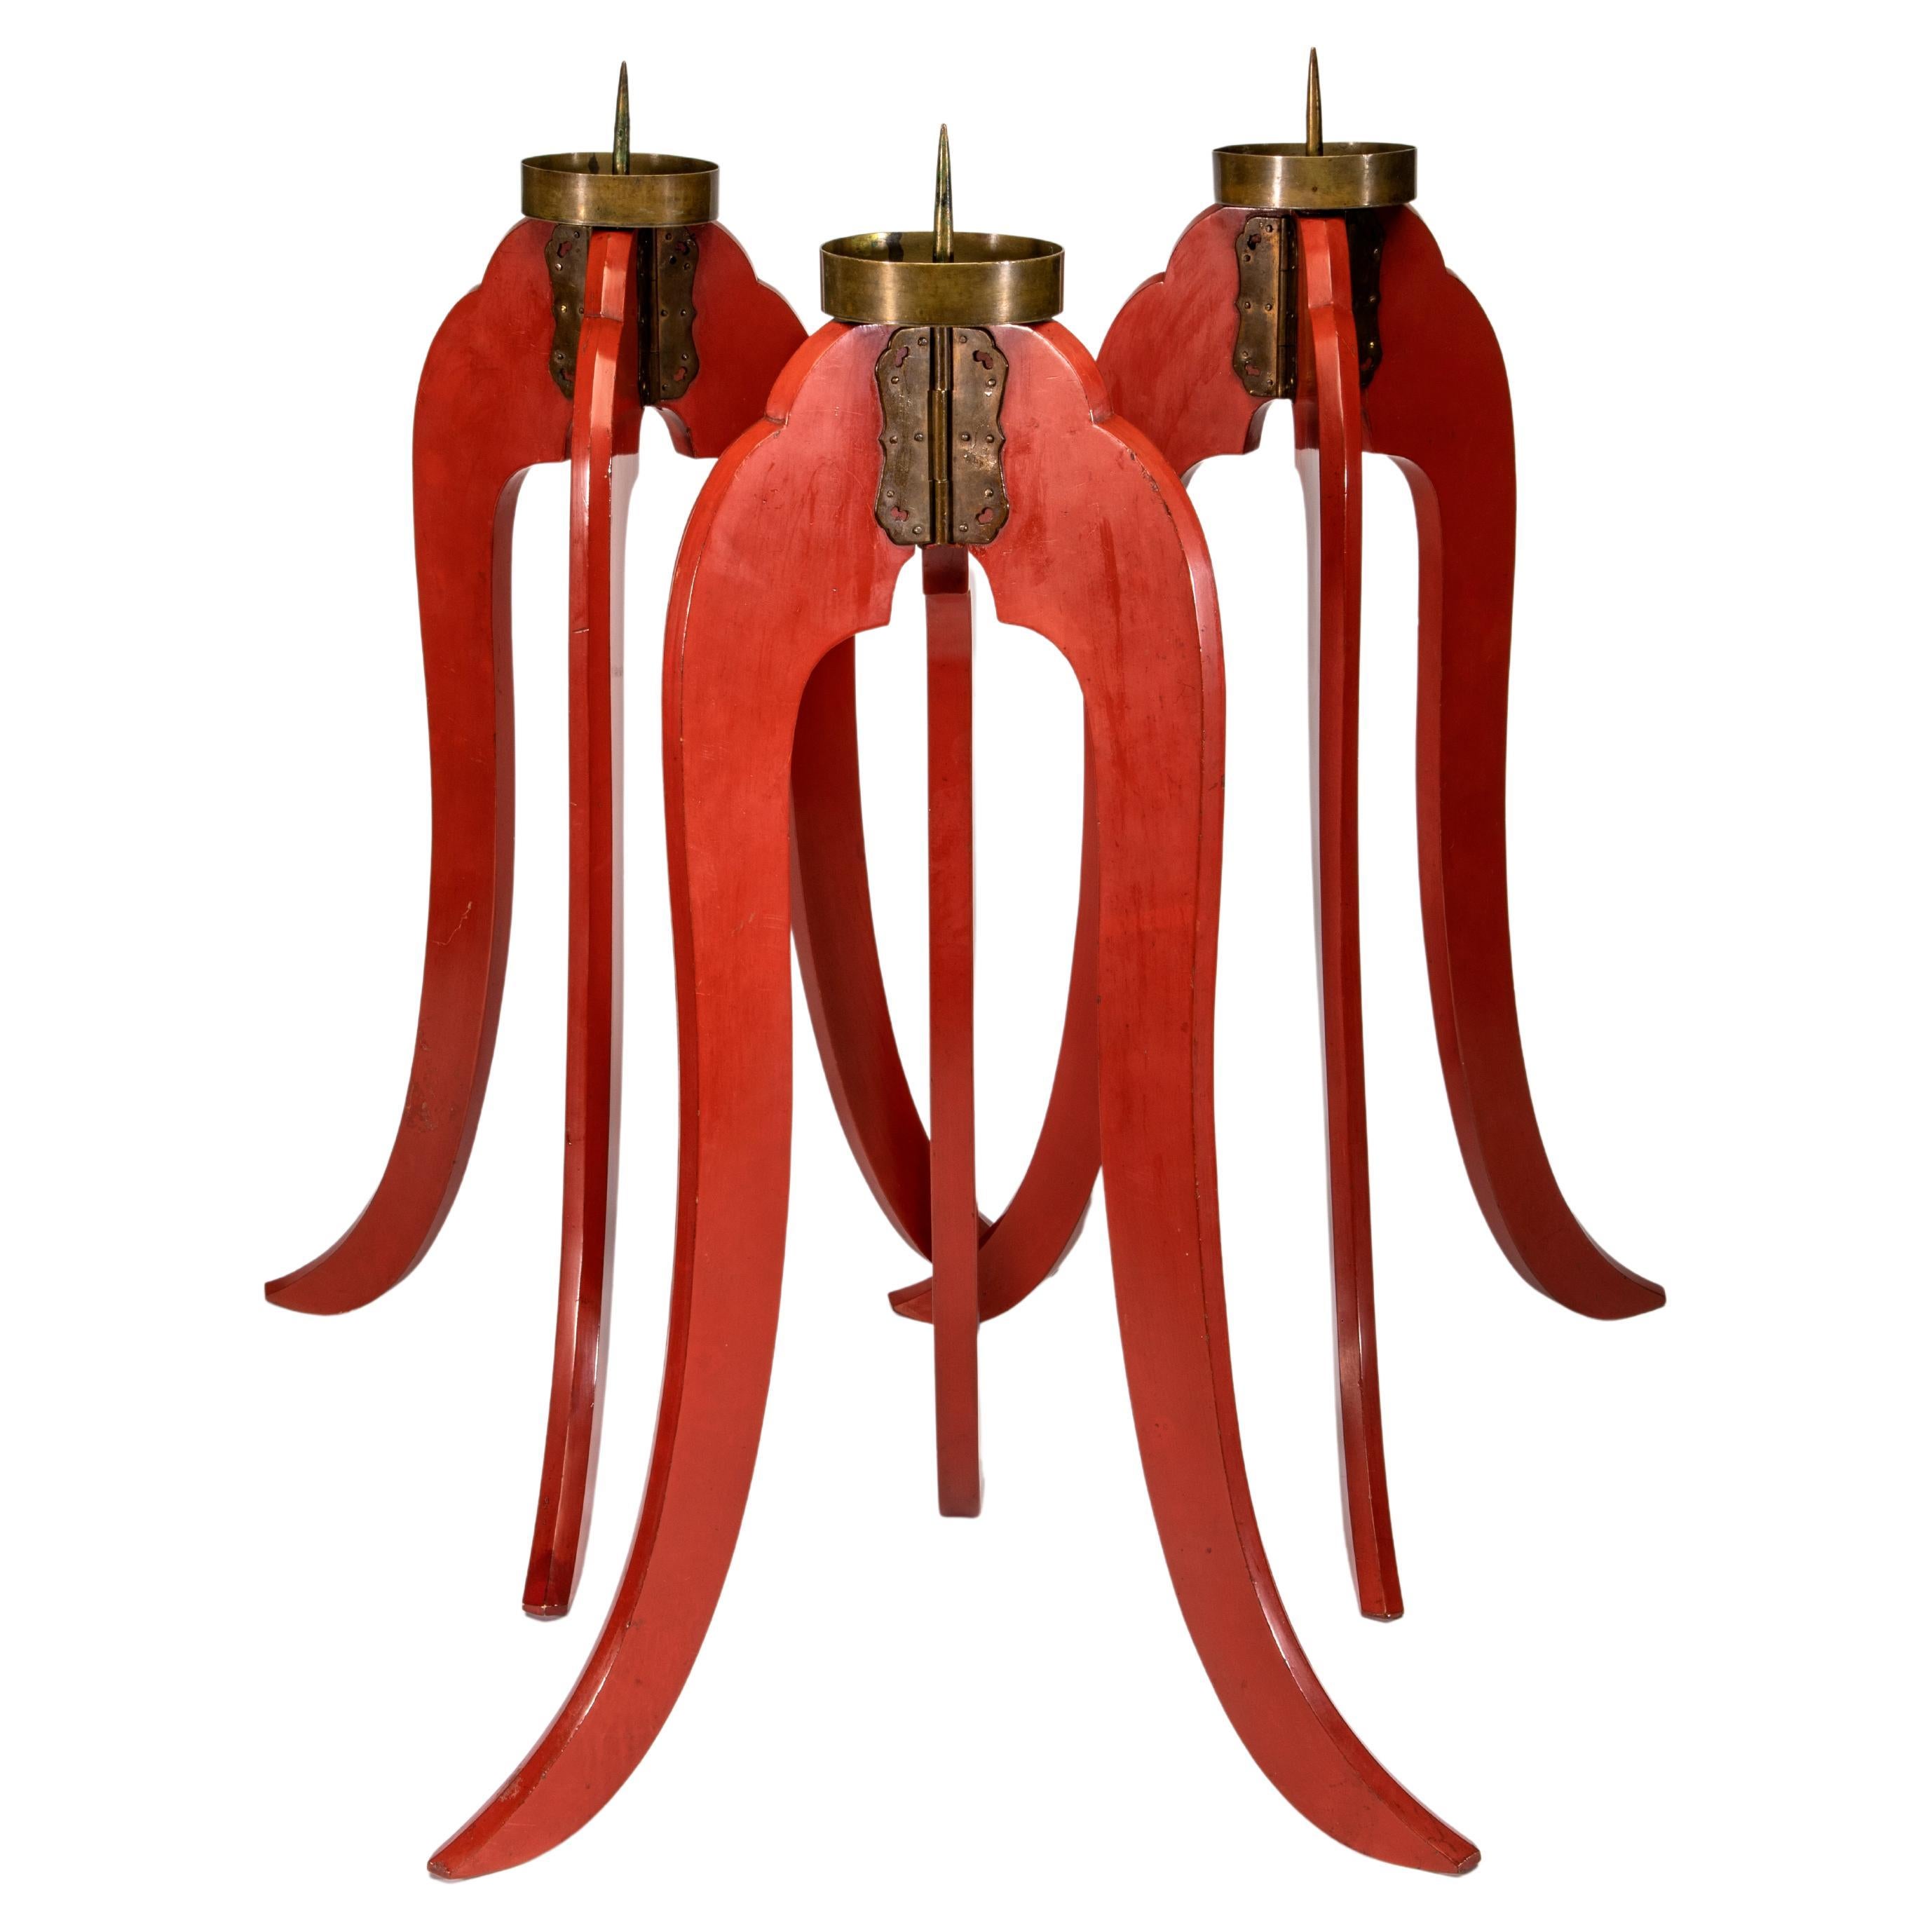 3 Japanese Red Lacquer Candlesticks For Sale